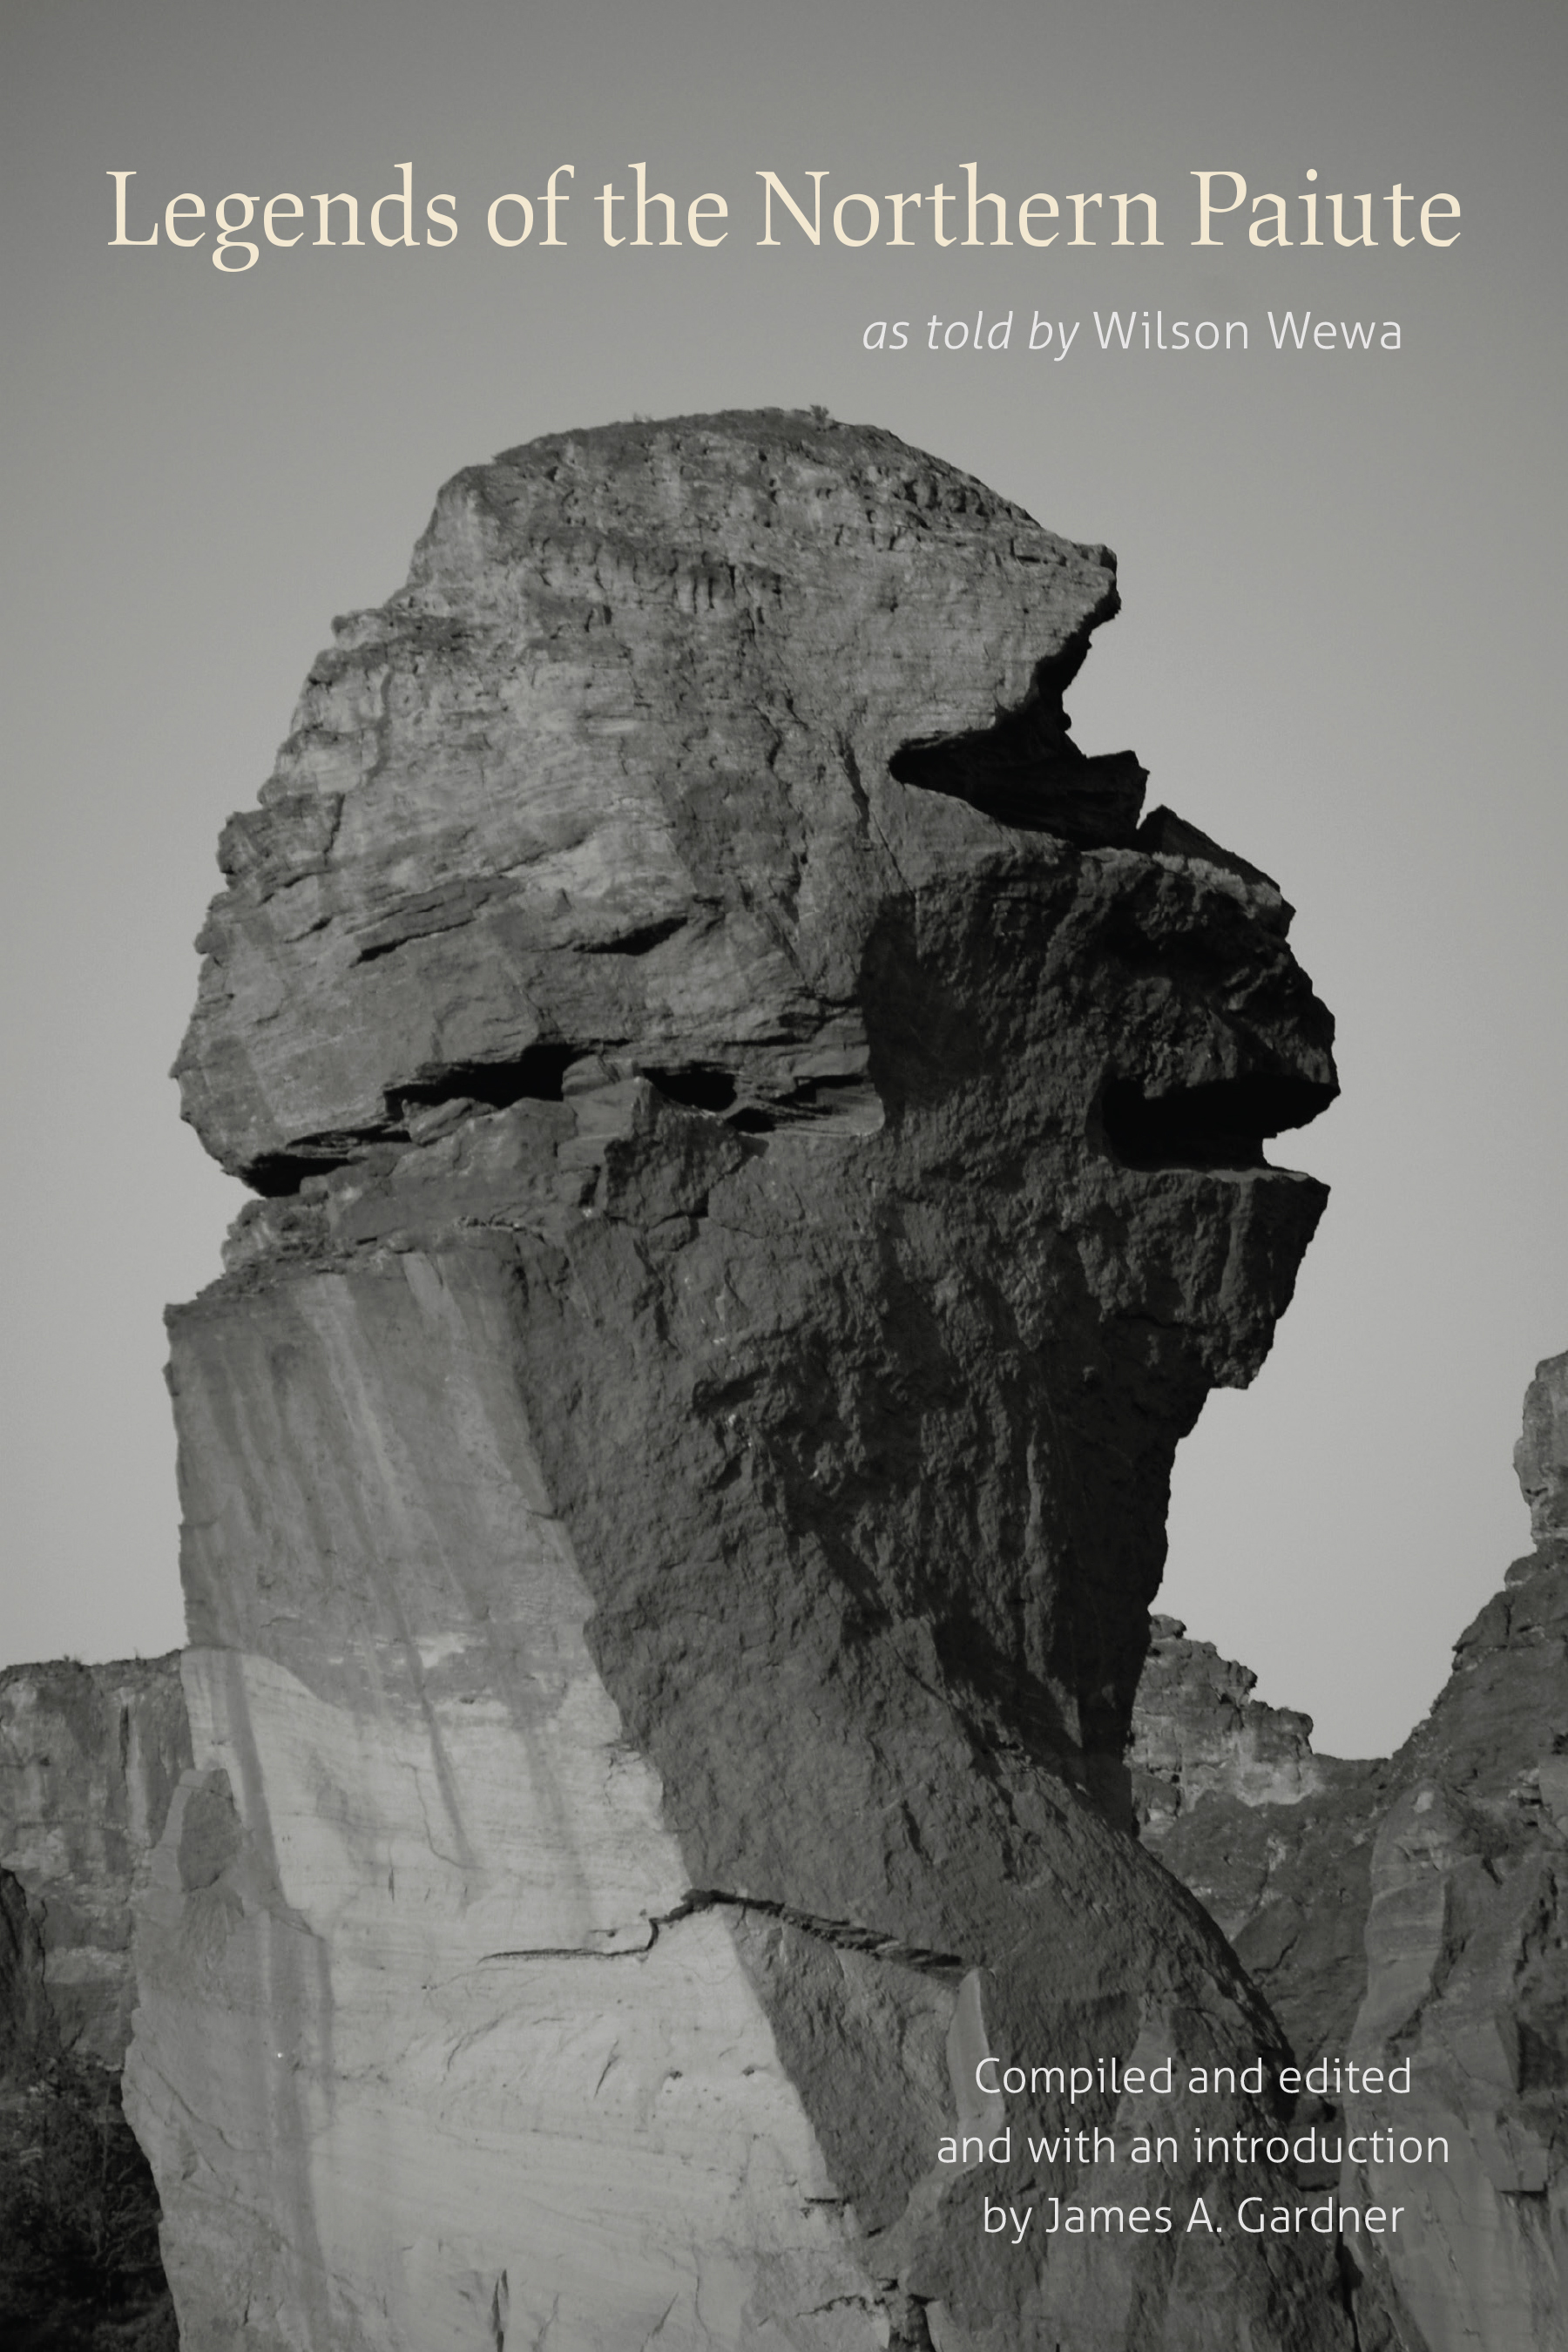 Book cover featuring Smith Rock pinnacle, known as Monkey Face or to the Paiute in Central Oregon as Numuzoho the Cannibal